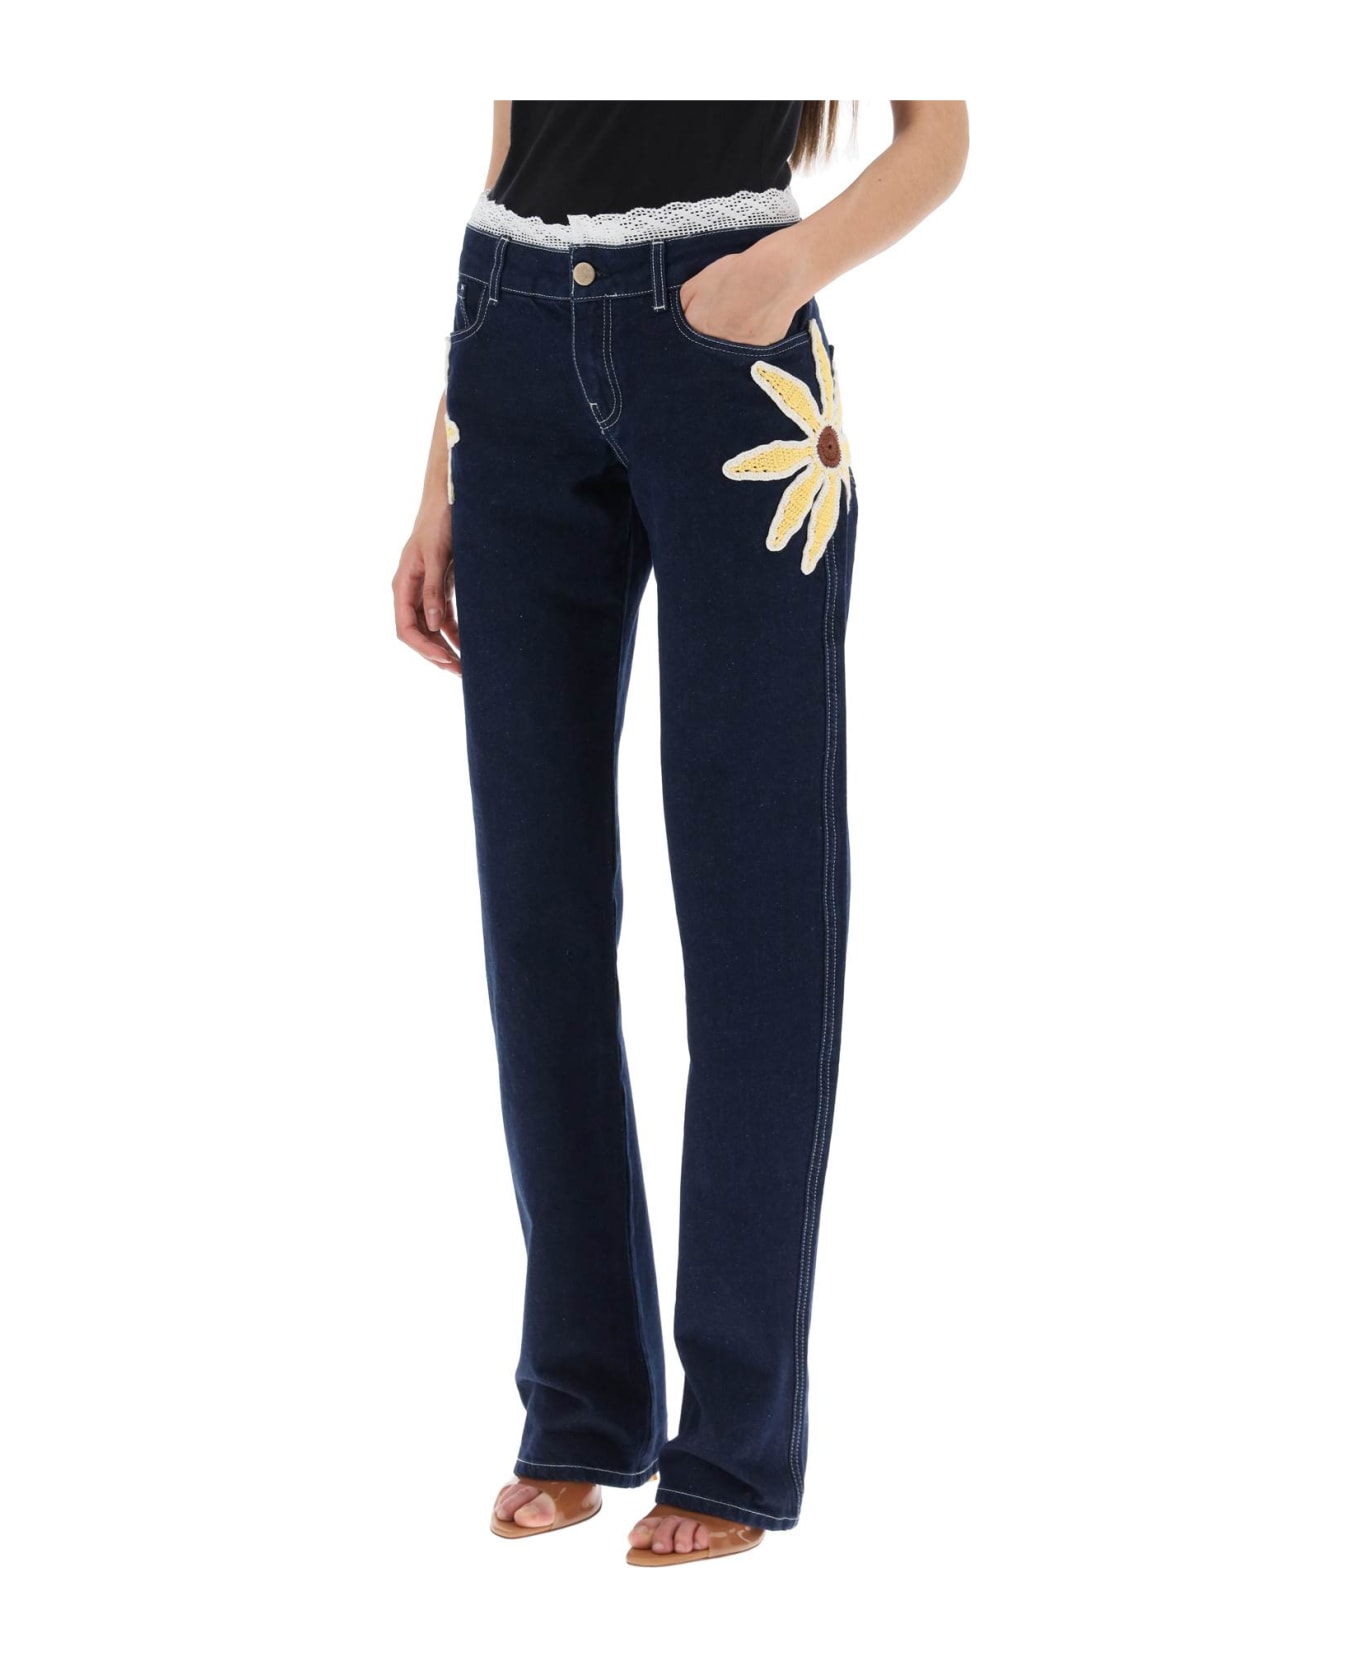 SIEDRES Low-rise Jeans With Crochet Flowers - BLUE (Blue) デニム